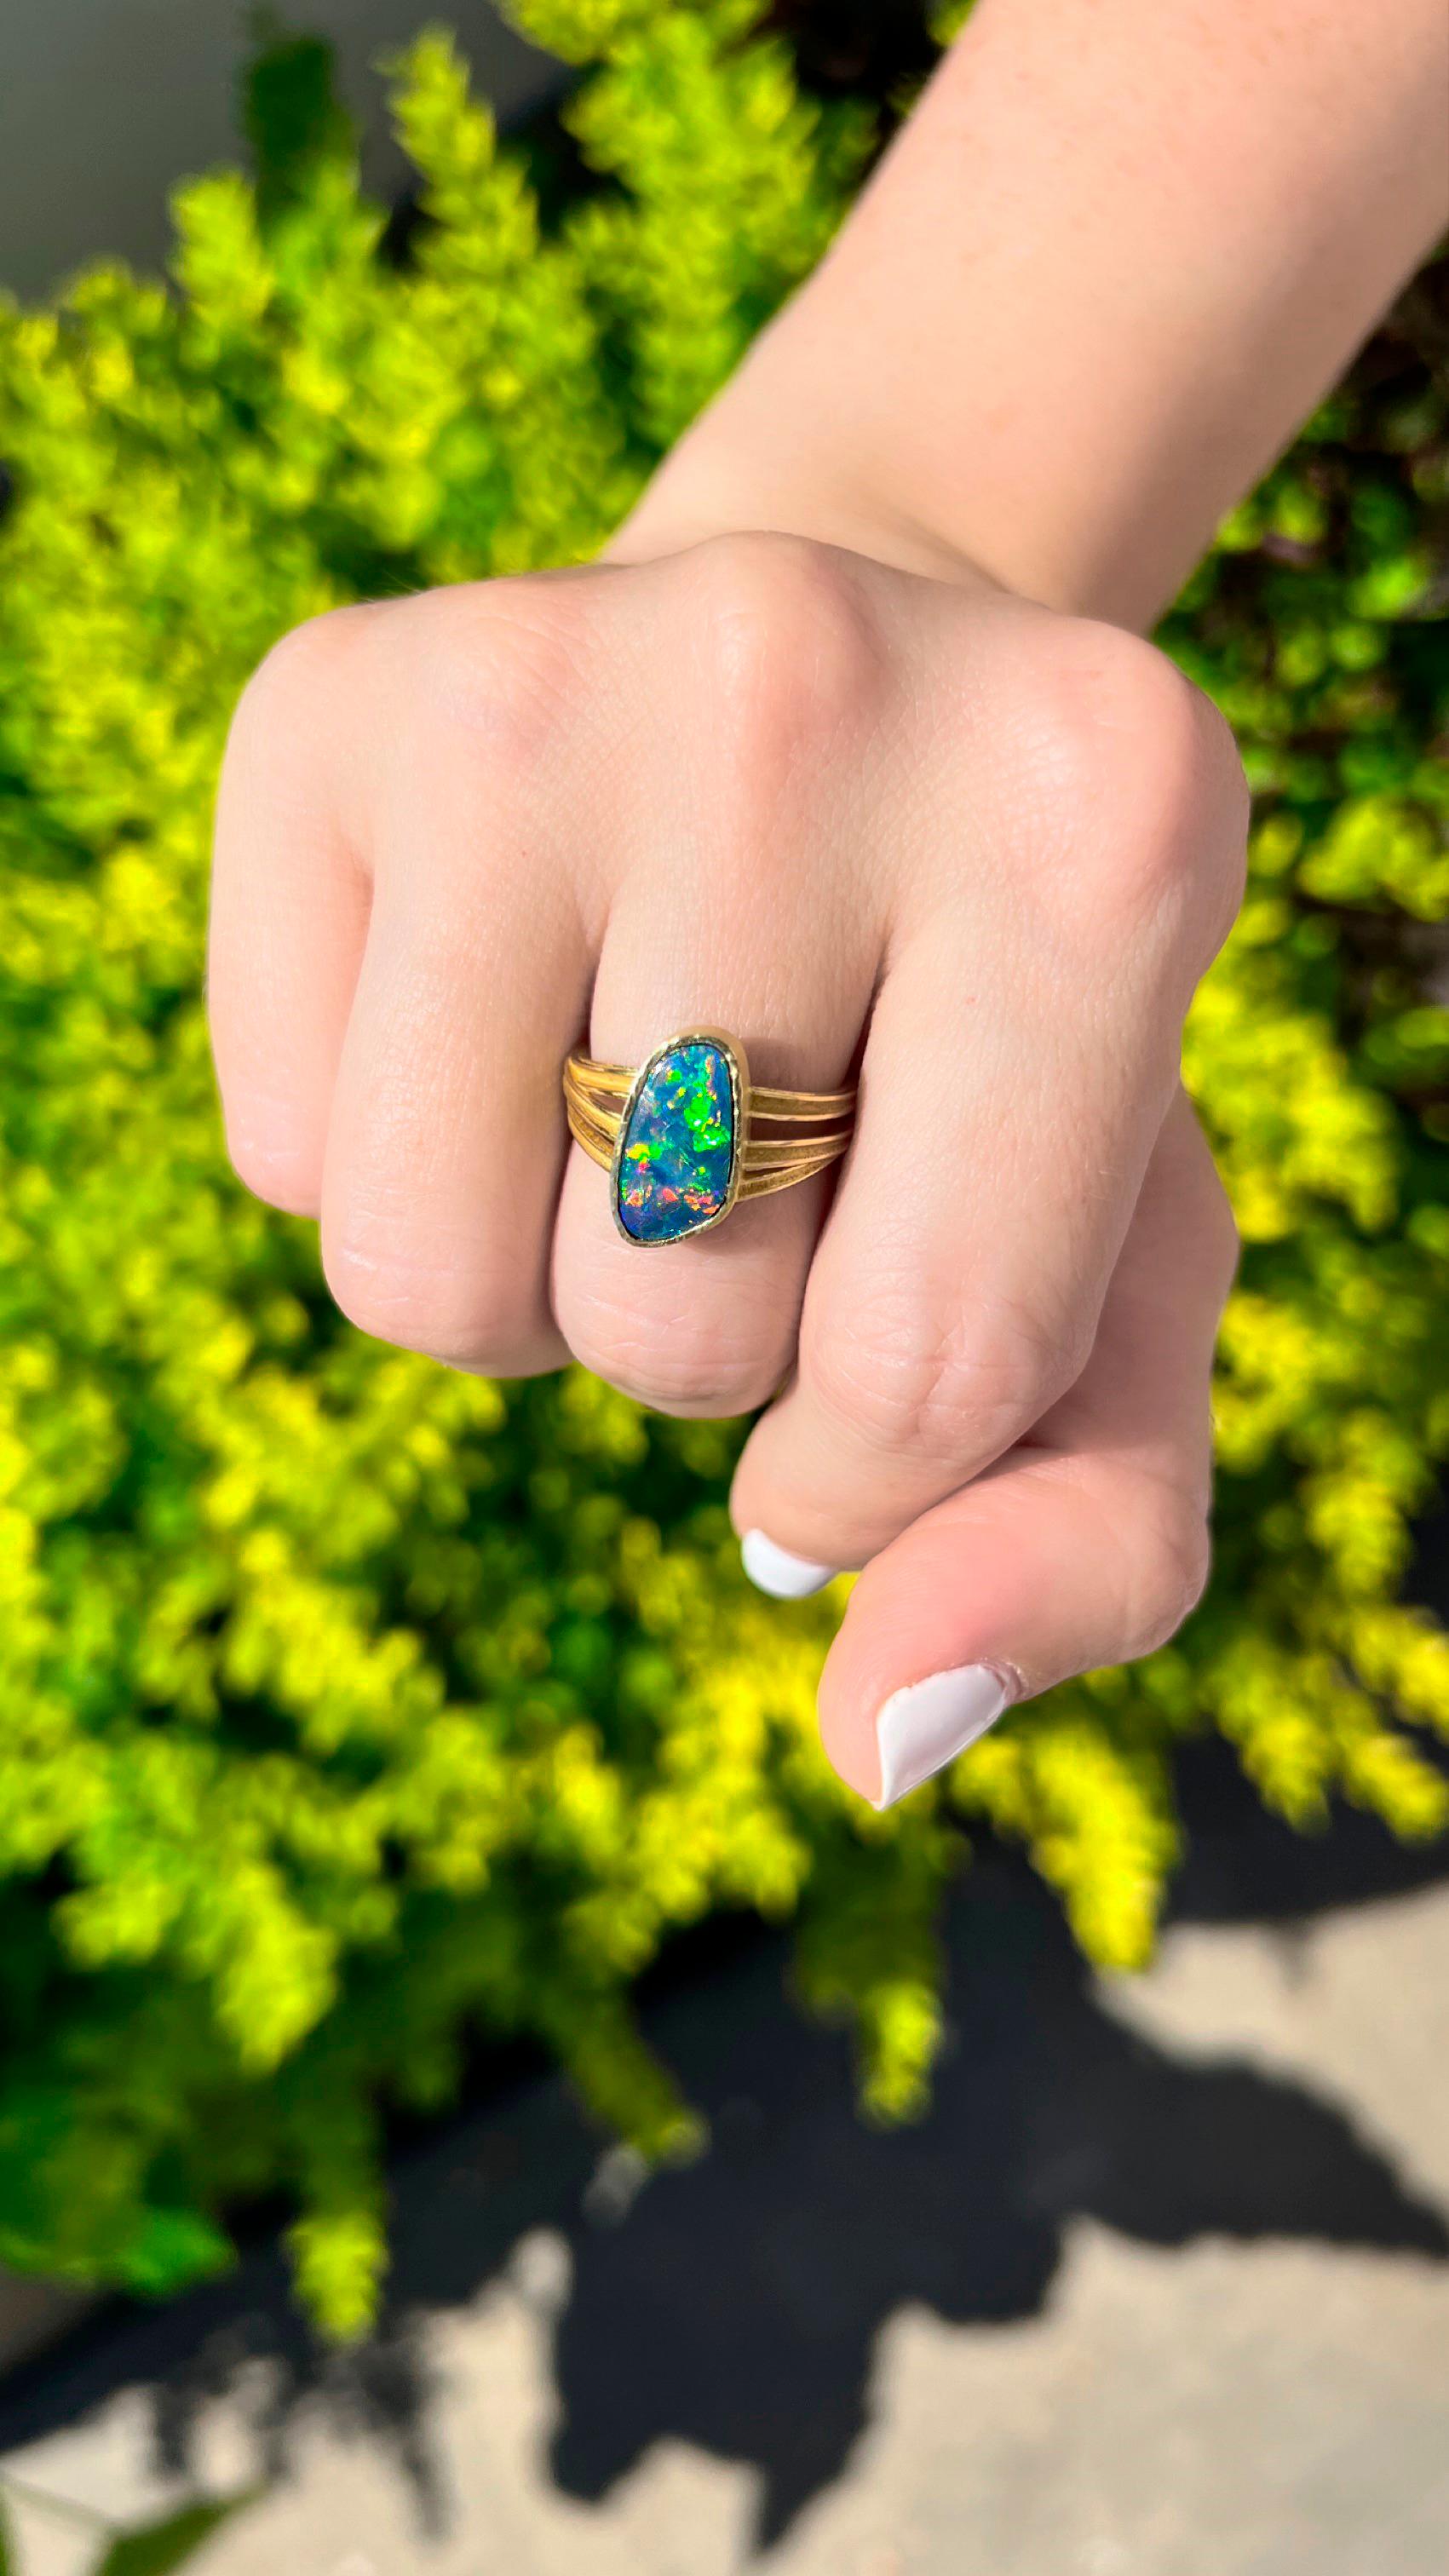 One of a Kind Ring handmade by award-winning jewelry designer Barbara Heinrich featuring a phenomenal, electrifying 2.31 carat gem boulder opal with extraordinary rainbow flash, bezel-set in hand-hammered 18k yellow gold atop Barbara's signature 18k